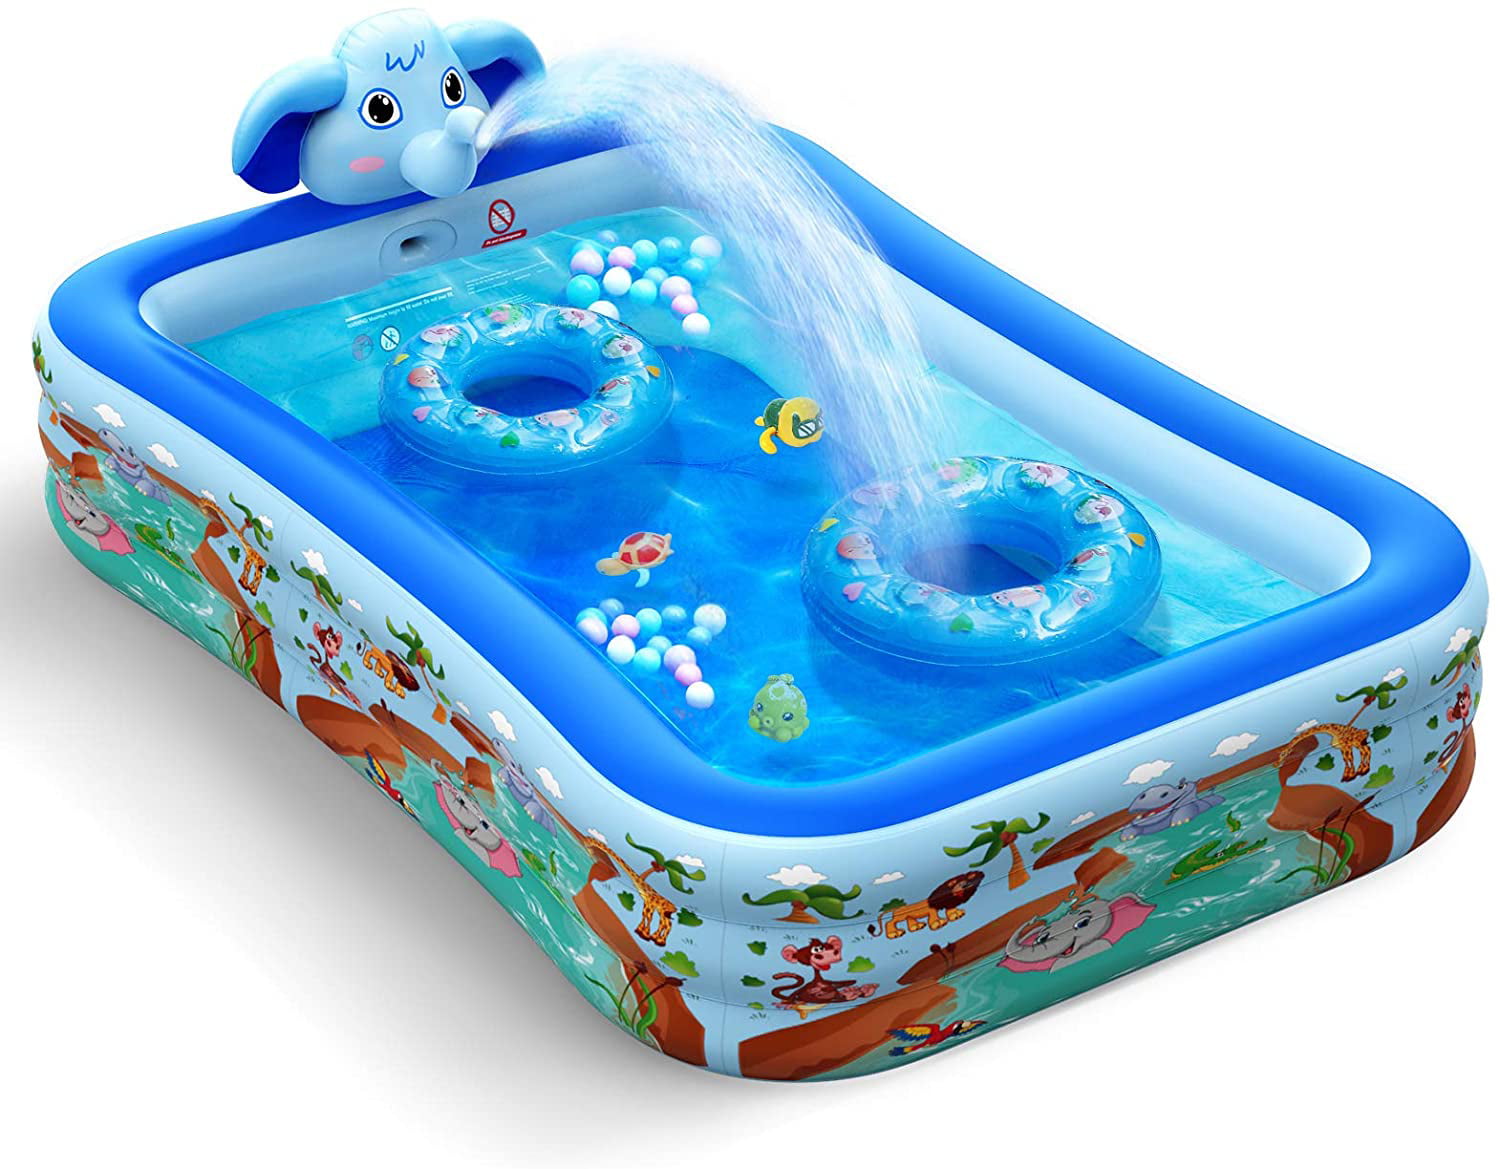 Children Swimming Circle Water Toy Swimming Ring Double Air Nozzle Transparent with Steering Wheel for Beach Pools for Ponds for Children's Pools